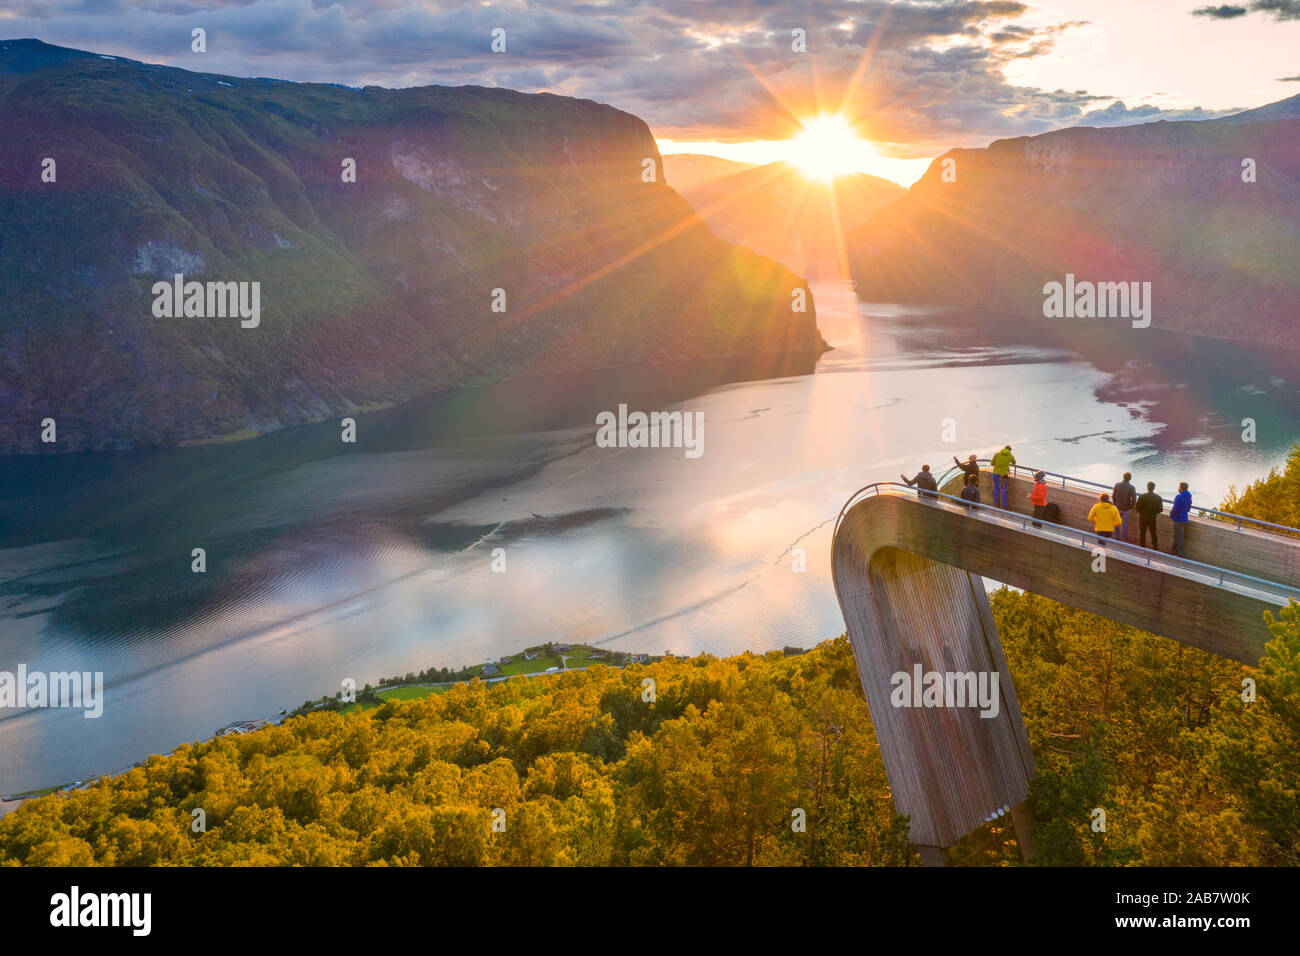 People admiring sunset from Stegastein viewpoint platform above the fjord, aerial view, Aurlandsfjord, Sogn og Fjordane county, Norway, Scandinavia Stock Photo